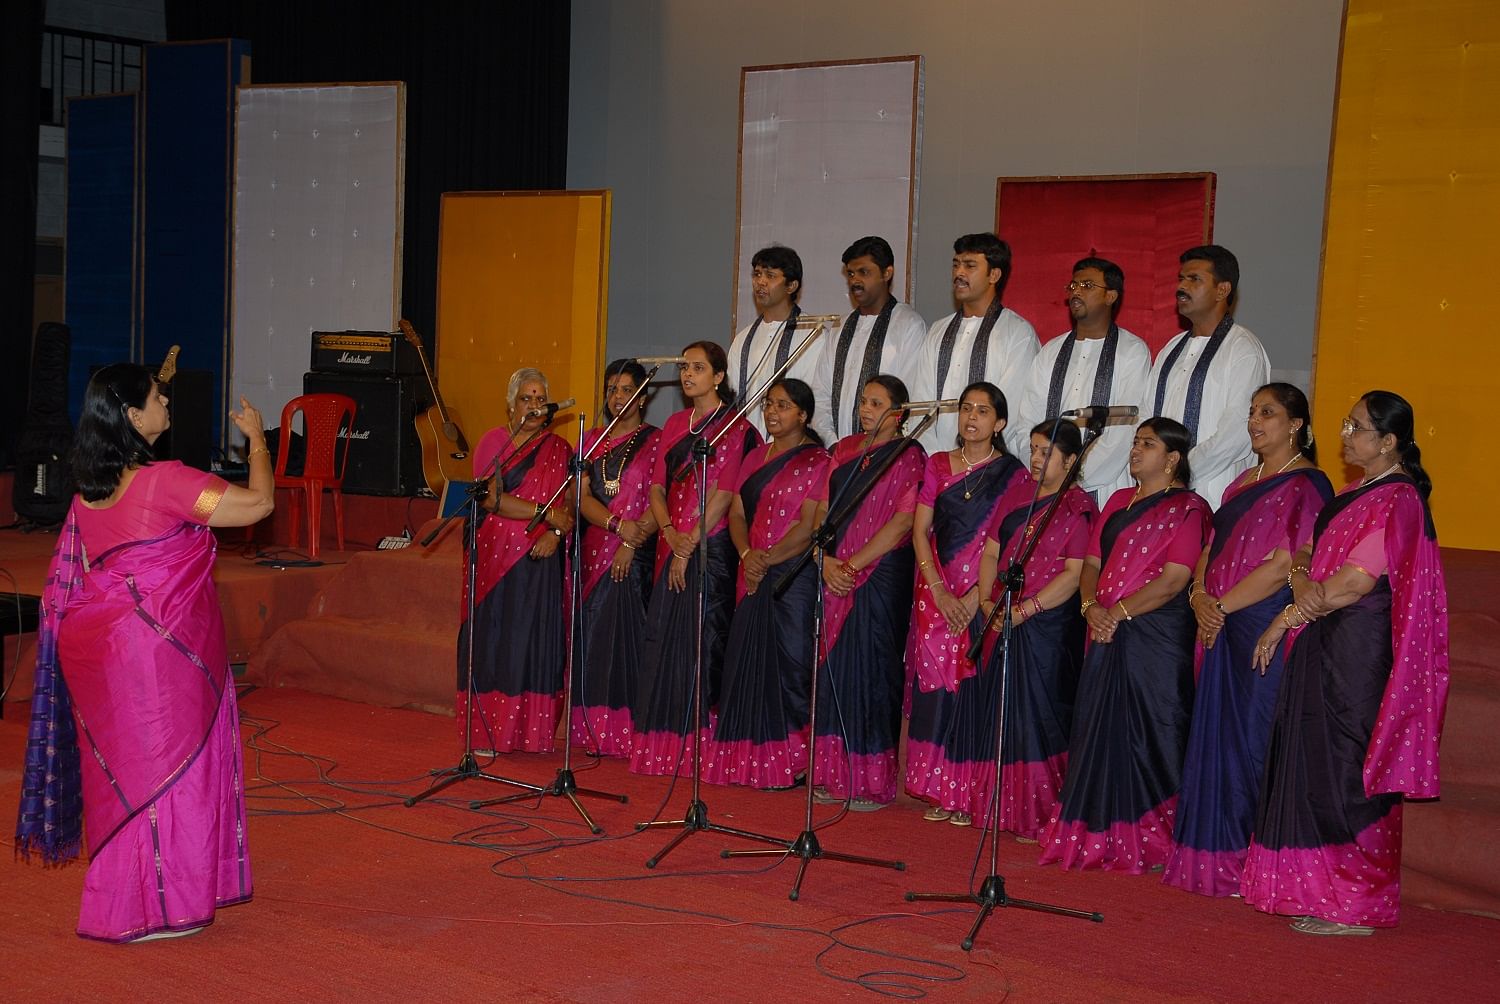 Bangalore Youth Choir was founded in 1984.